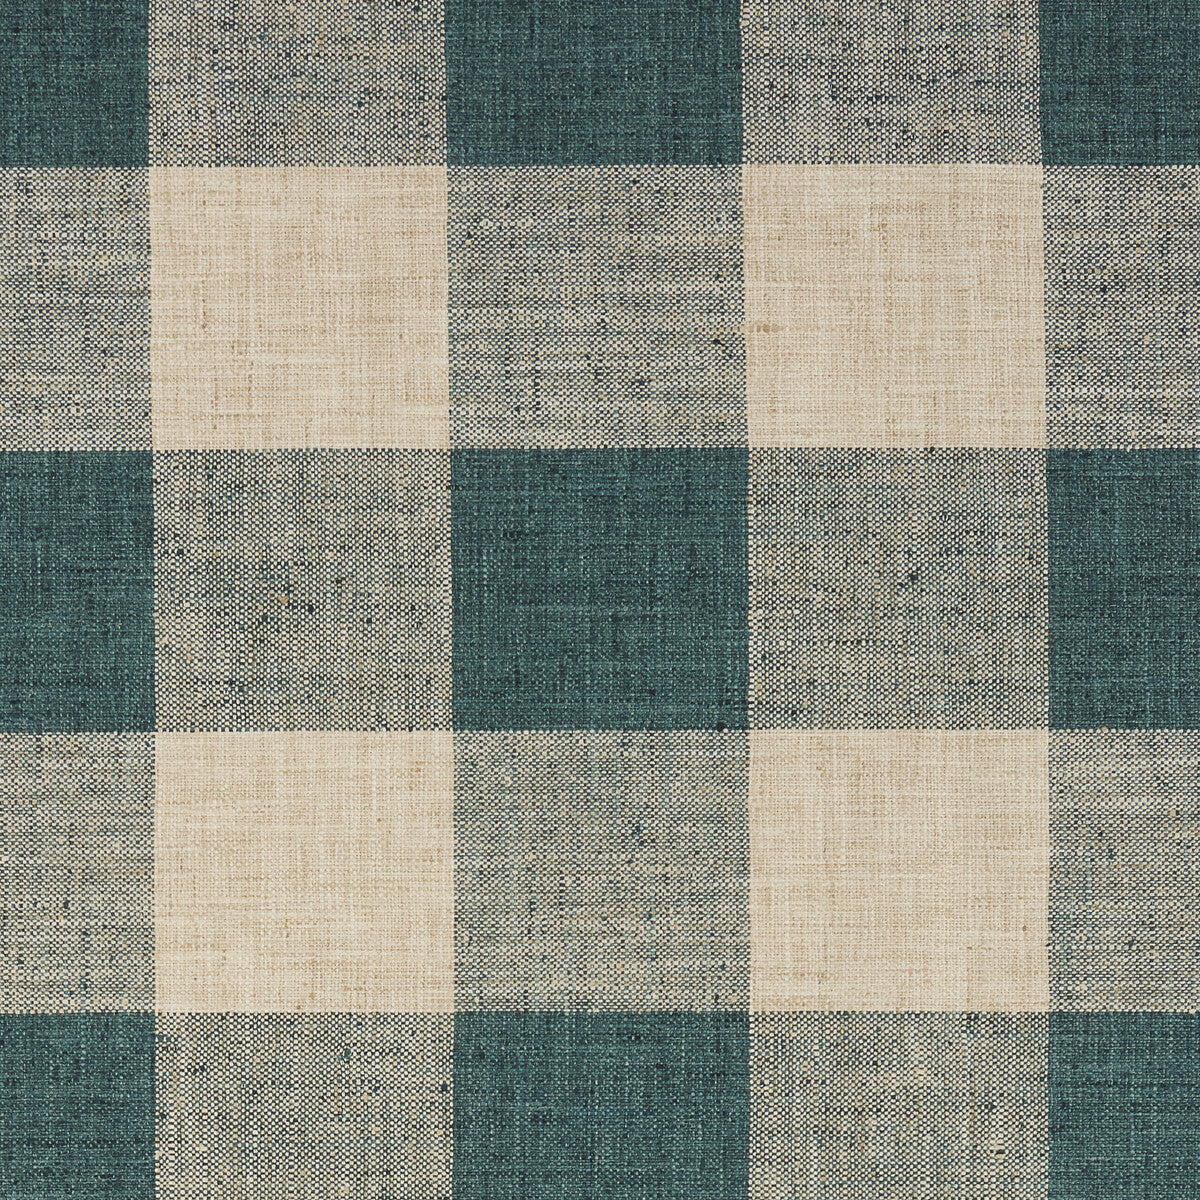 Kravet Basics fabric in 34090-31 color - pattern 34090.31.0 - by Kravet Basics in the Bungalow Chic II collection